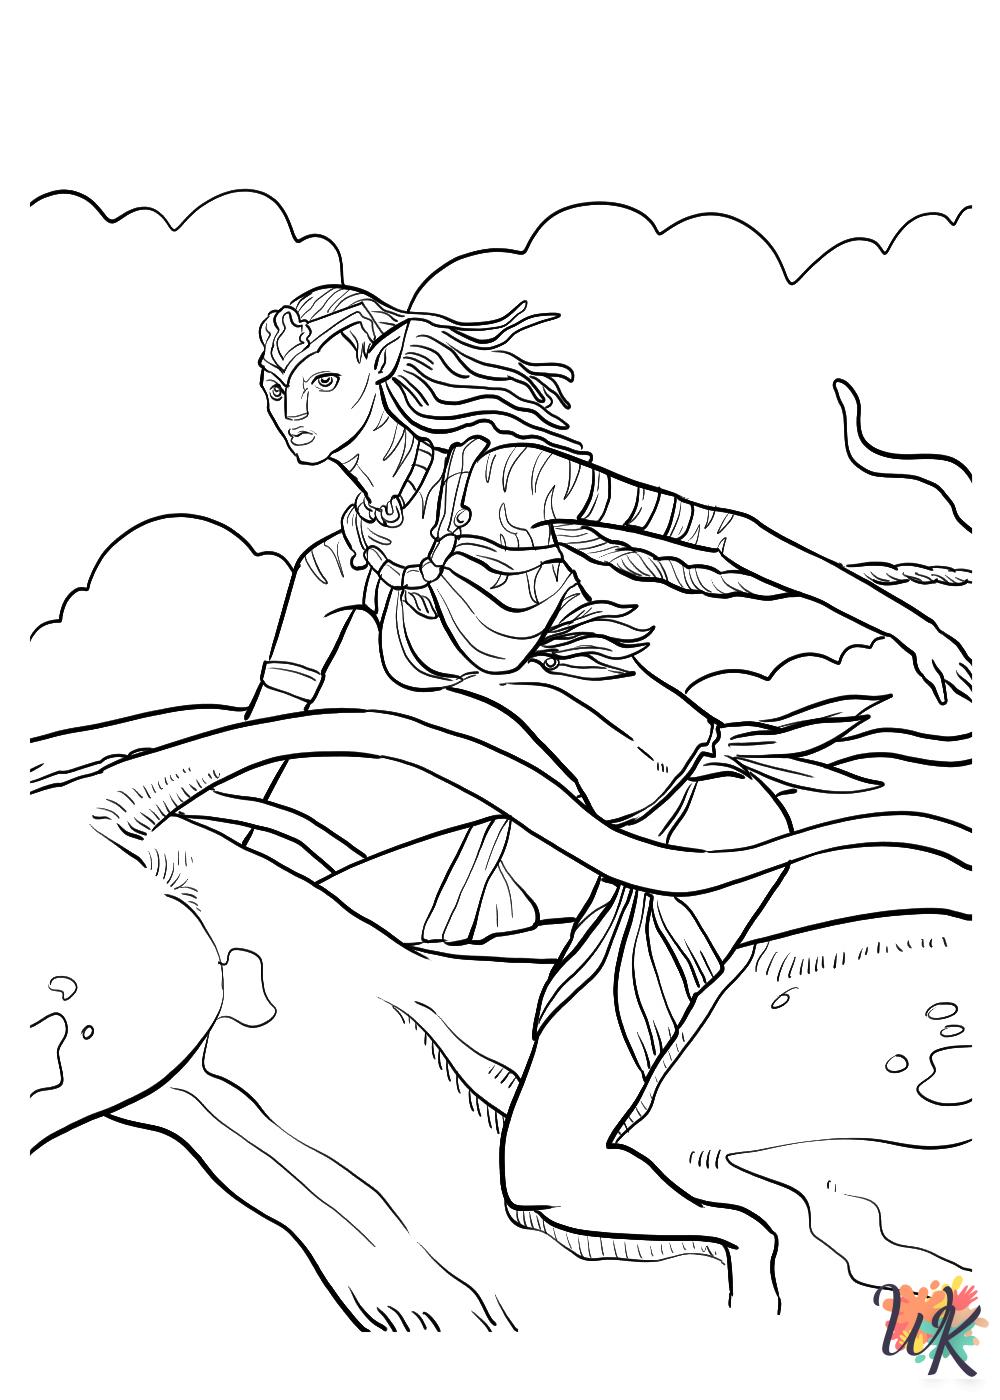 Avatar coloring pages free printable